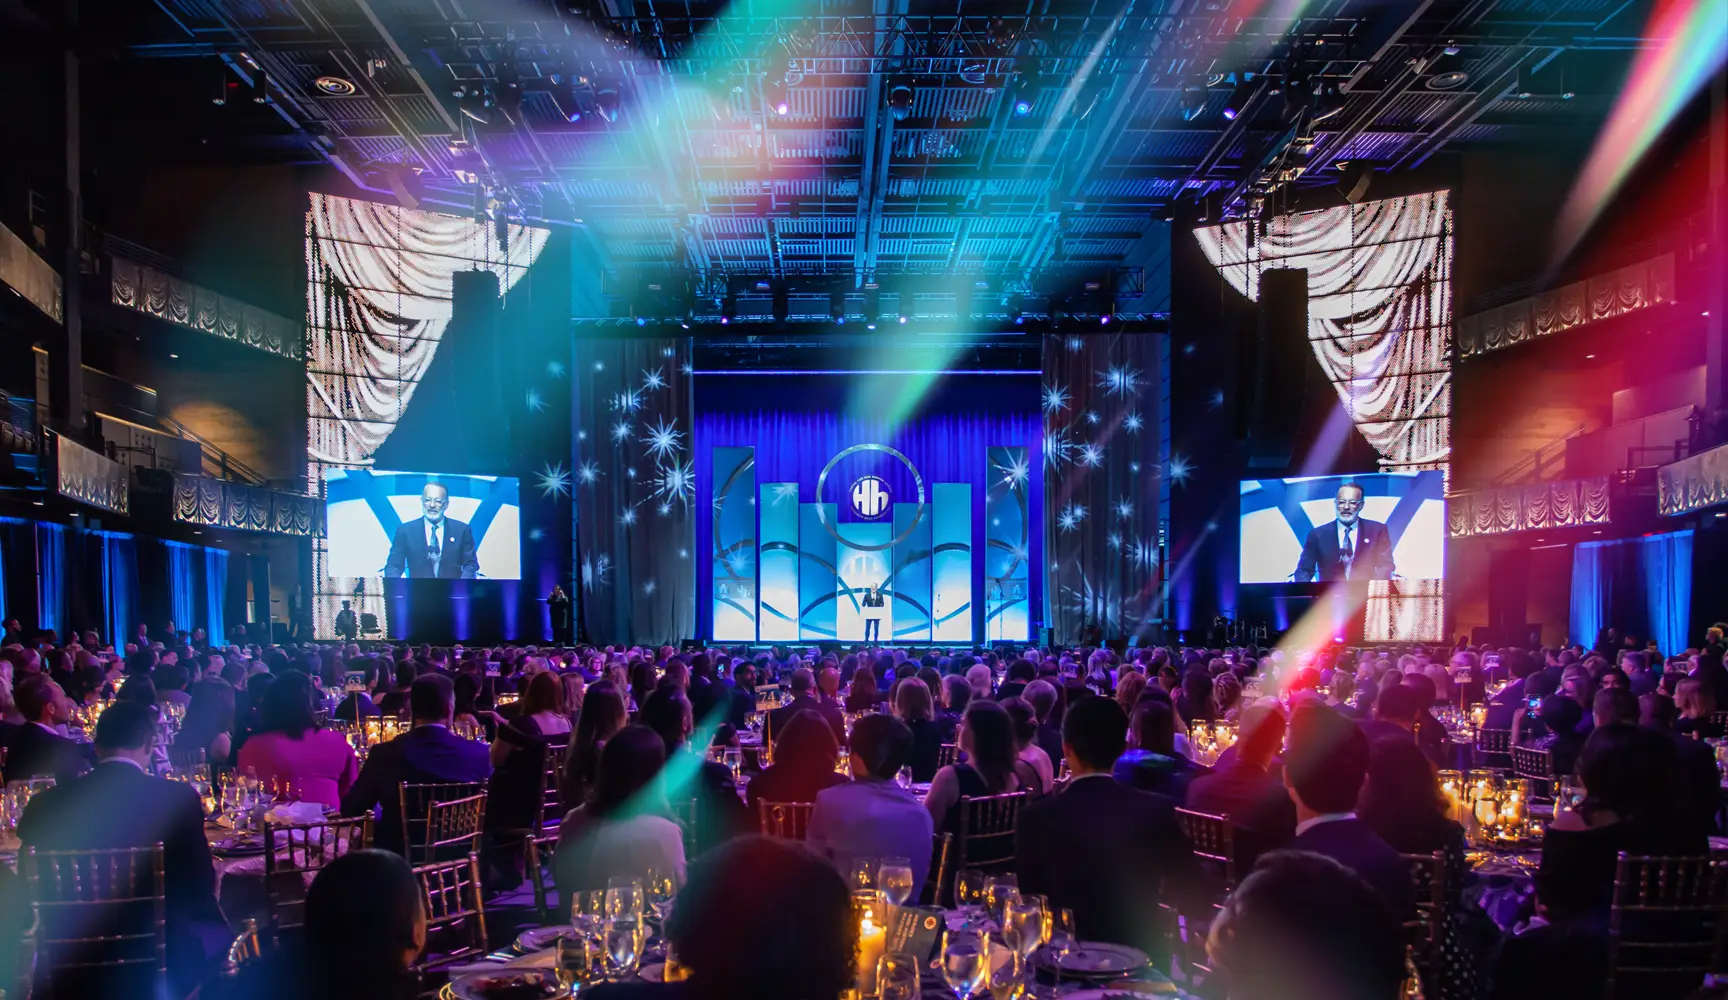 Image from the Heroes + History Makers Gala by the Elizabeth Dole Foundation.